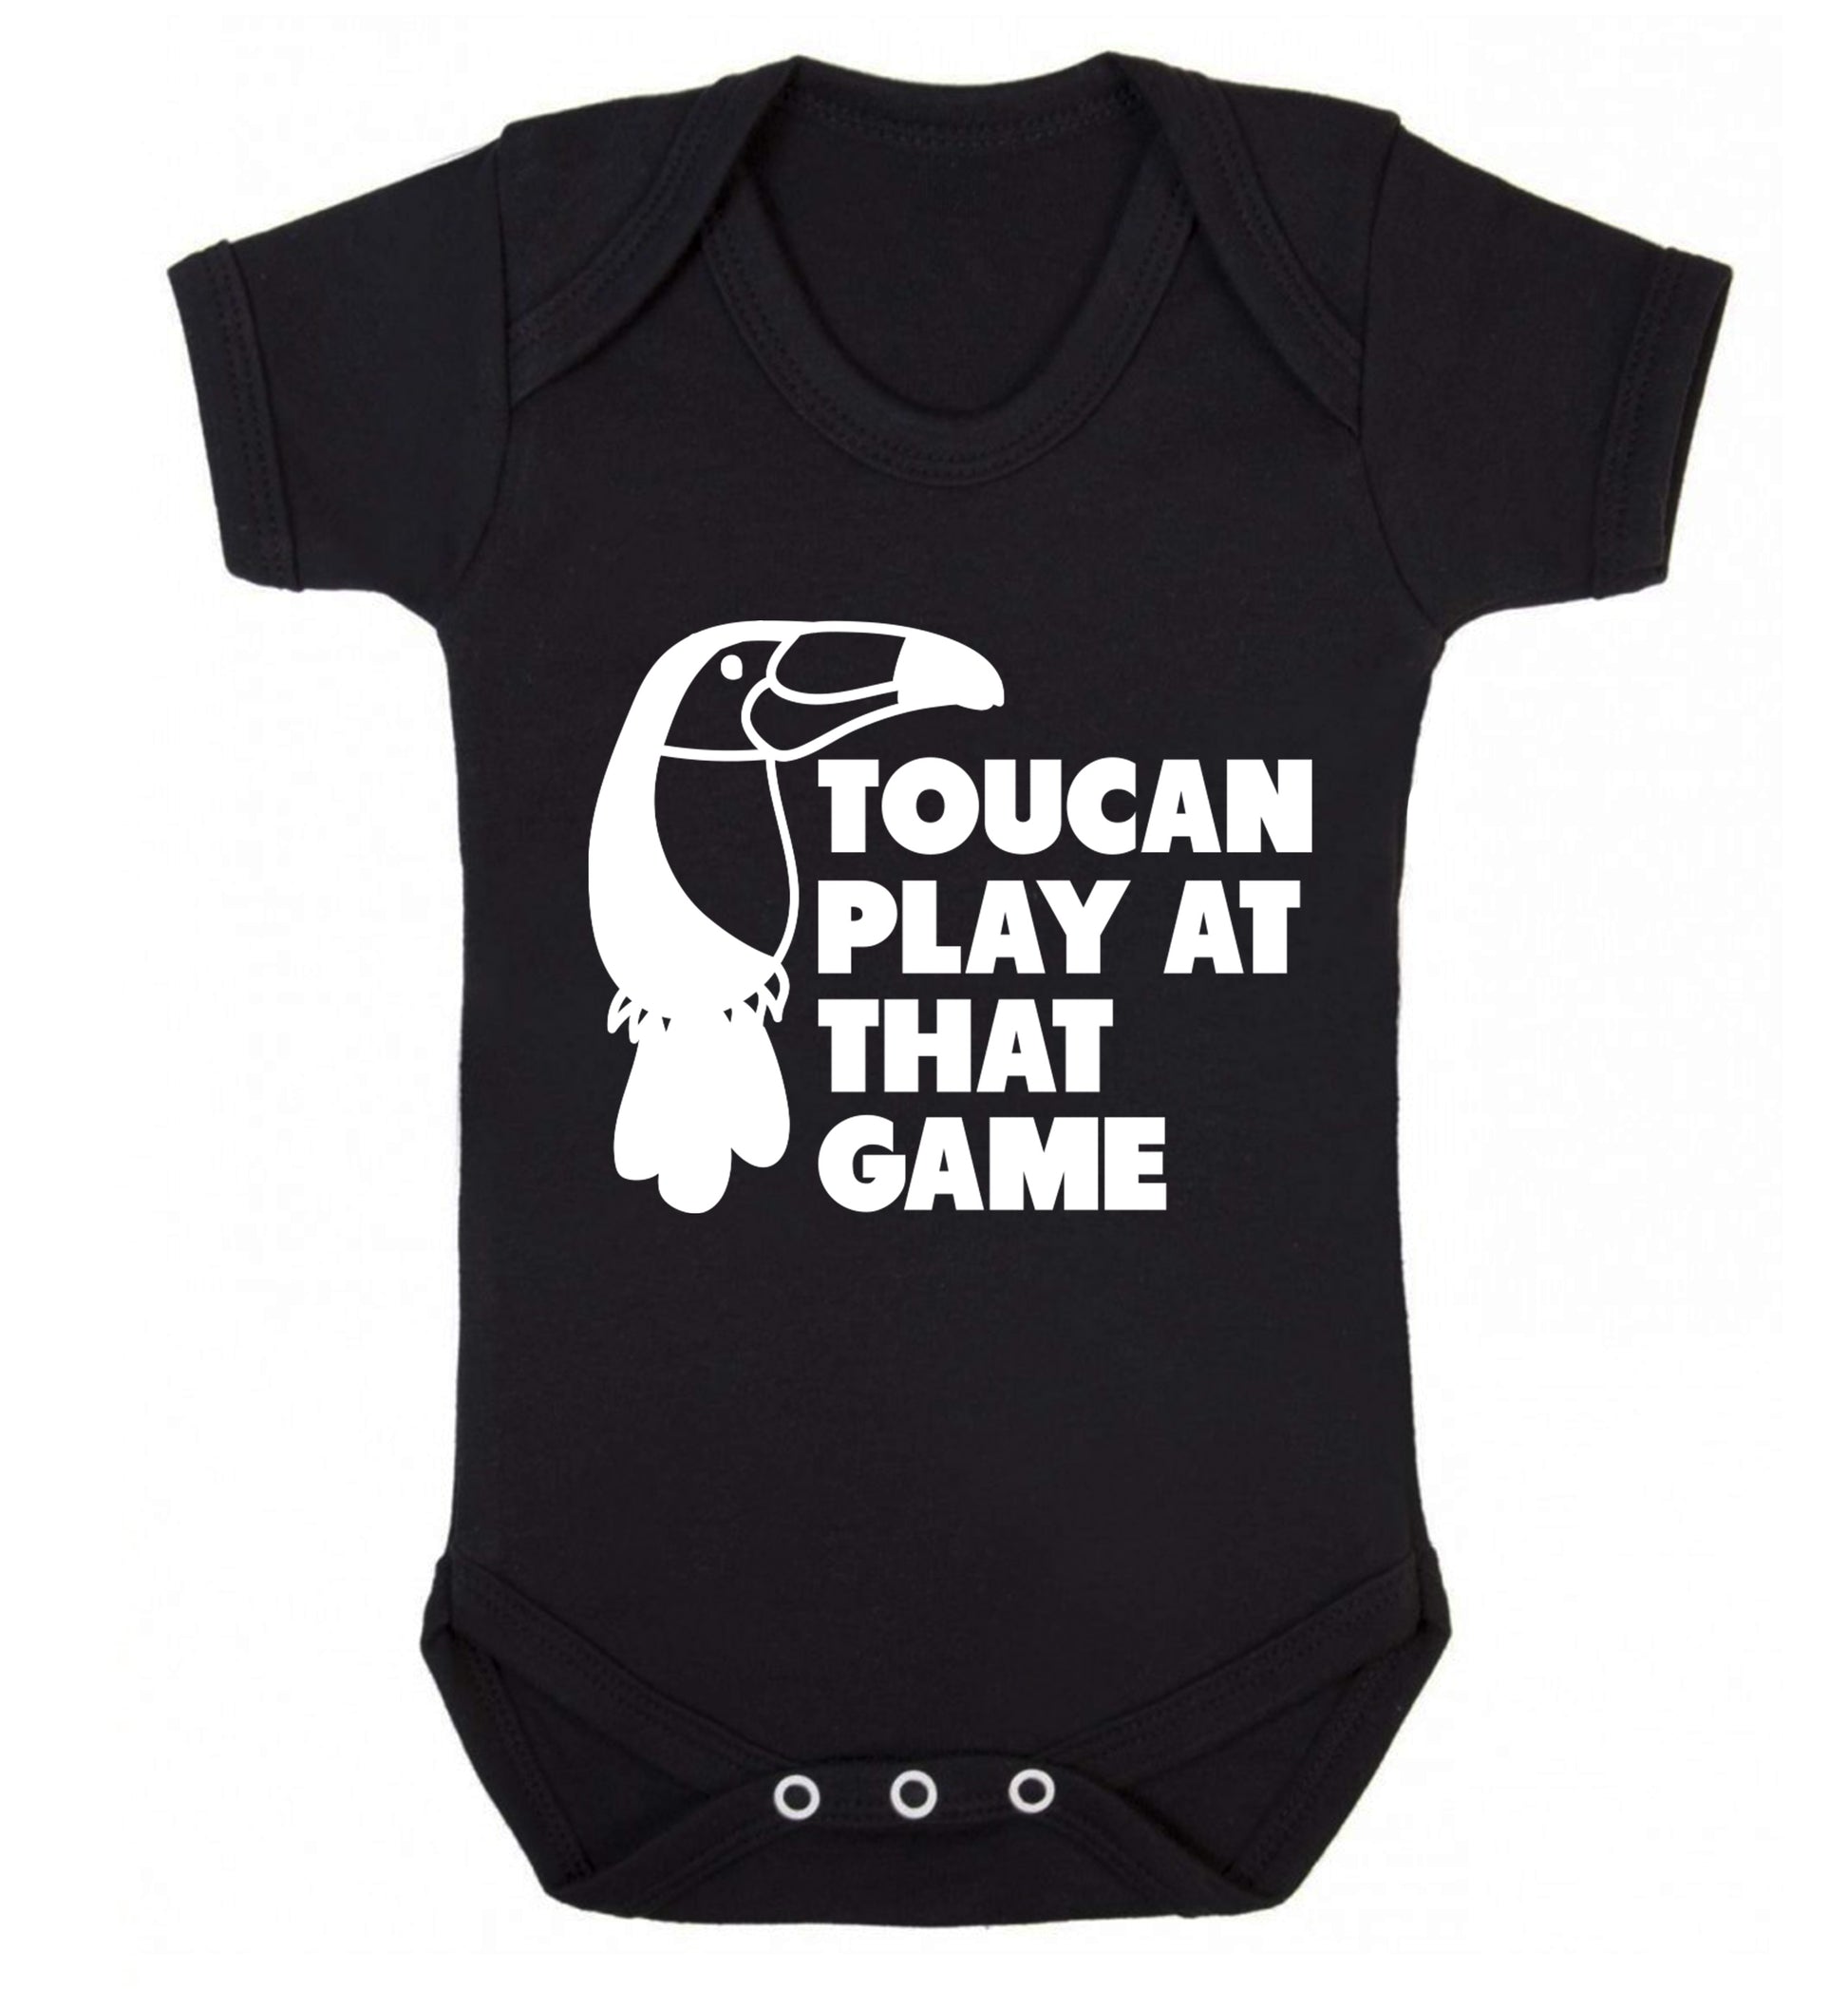 Toucan play at that game Baby Vest black 18-24 months